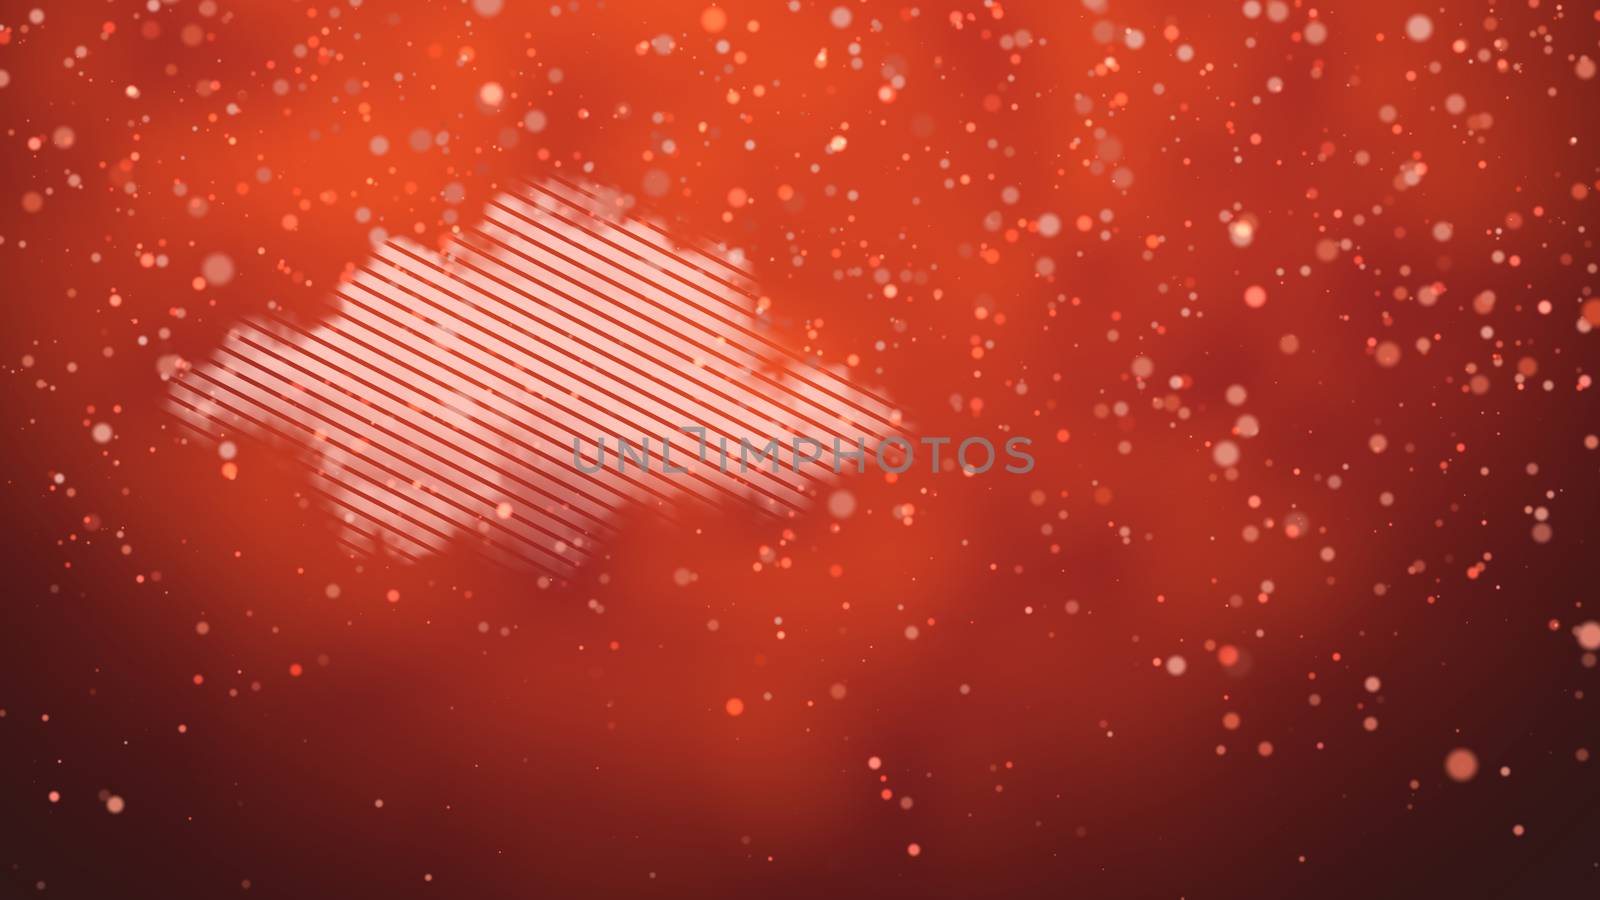 2d illustration with a striped cloud on a red background and falling particles. Pattern with copy text.